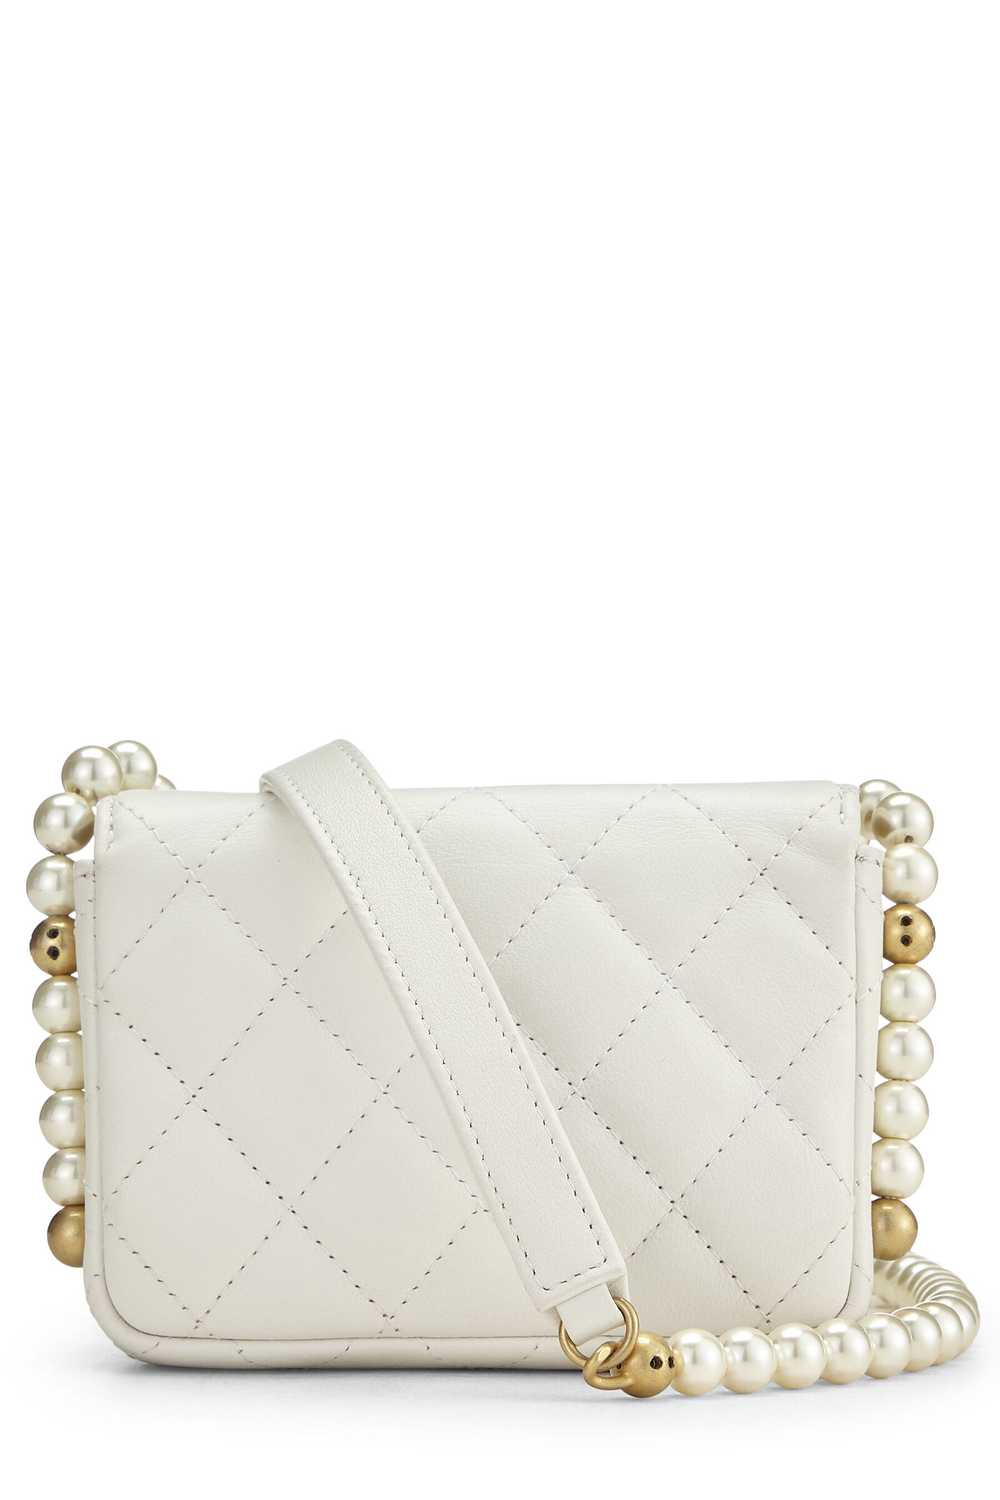 White Calfskin About Pearls Card Holder With Chain - image 4